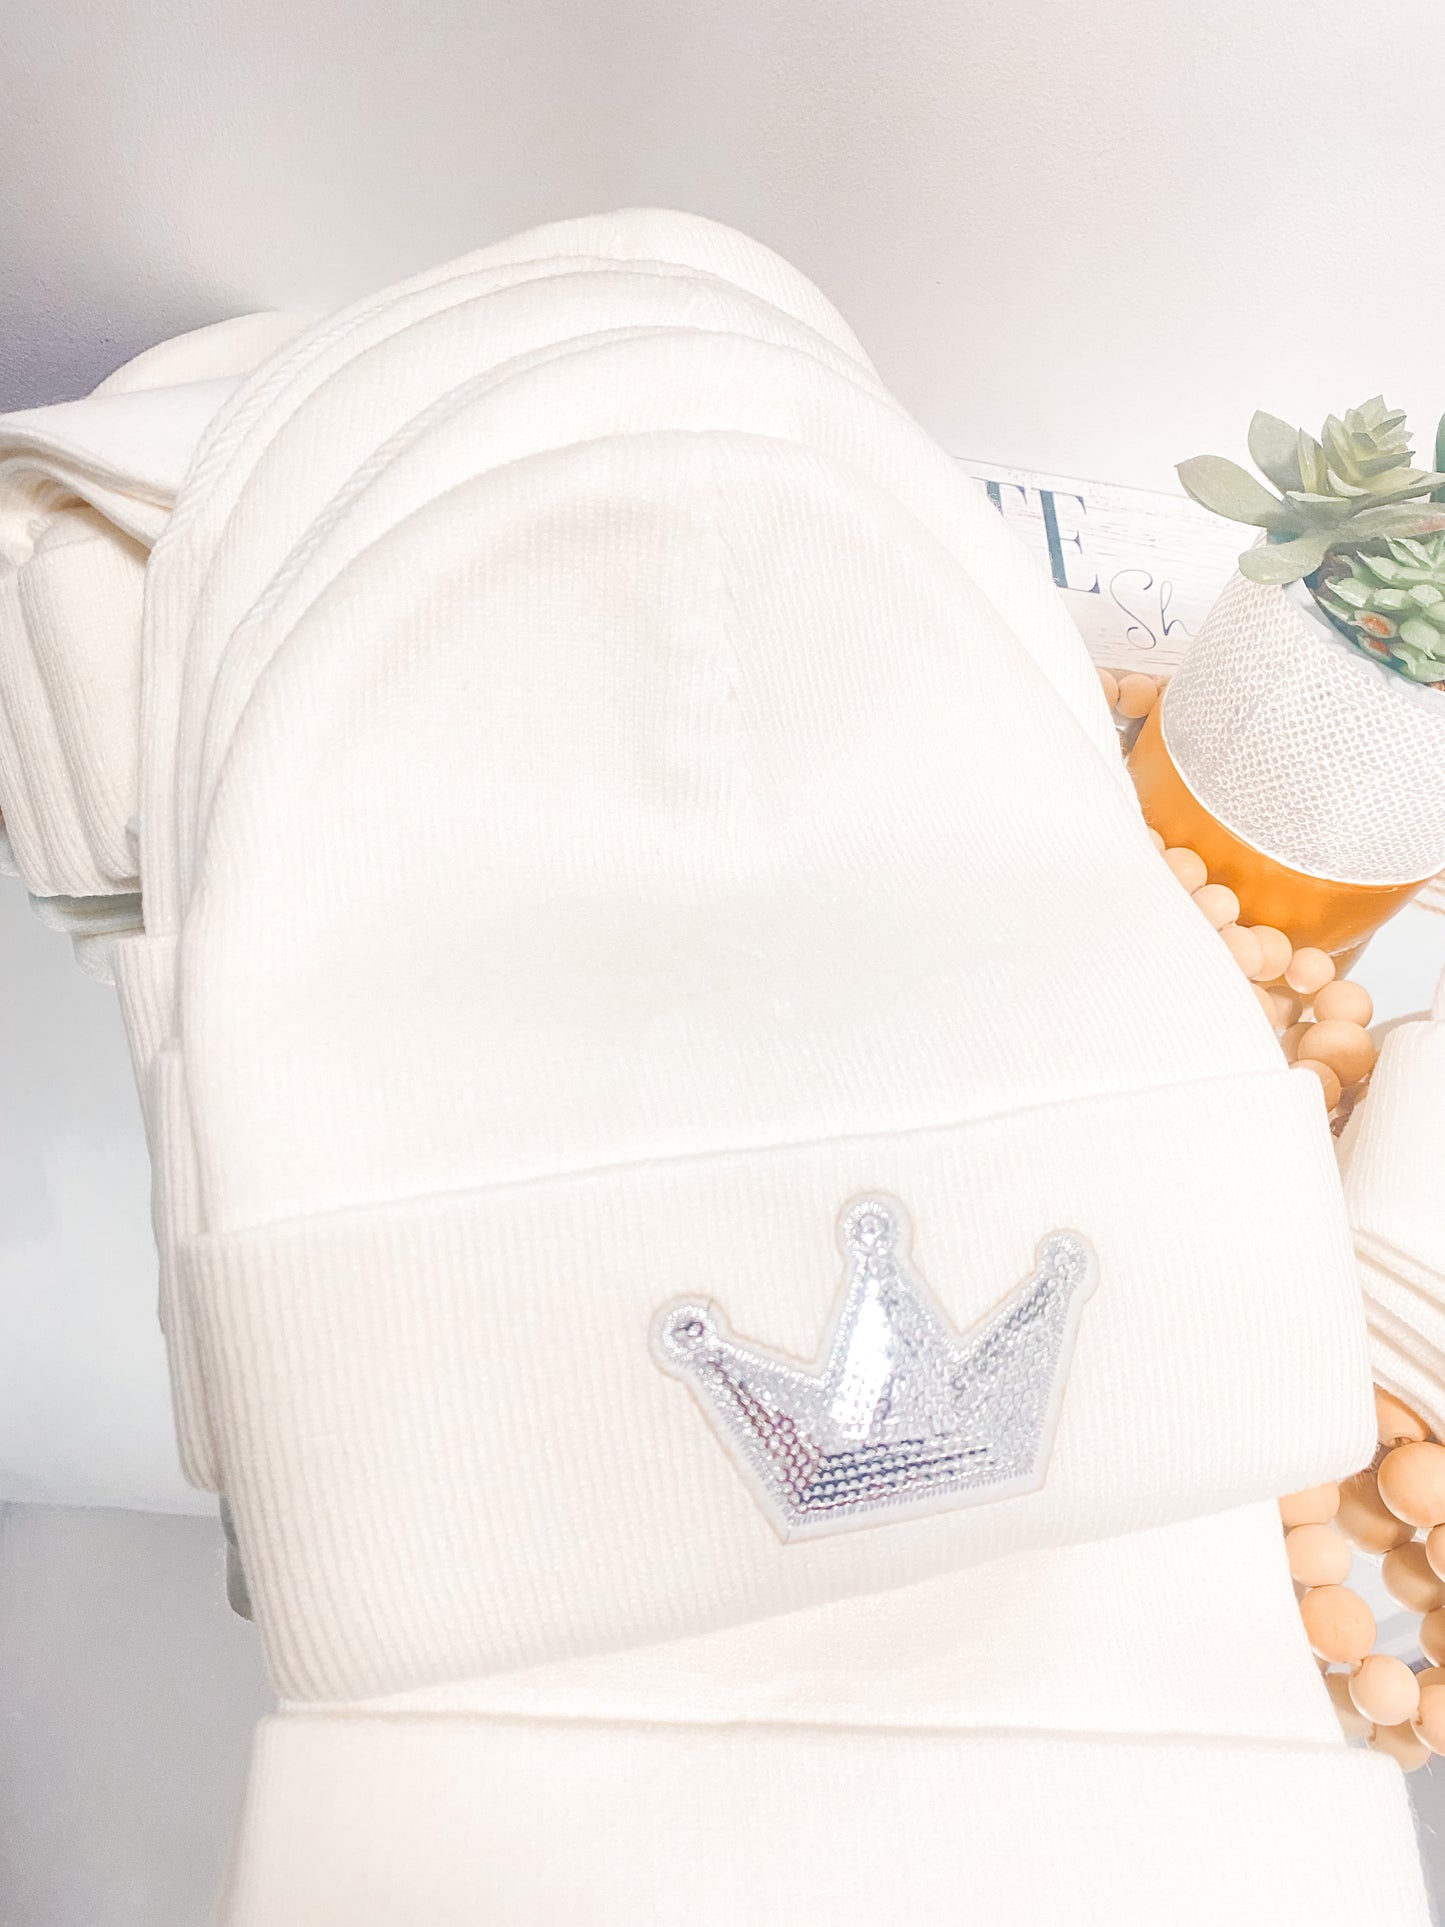 Embroidered Patch Beanie in Snowfall White